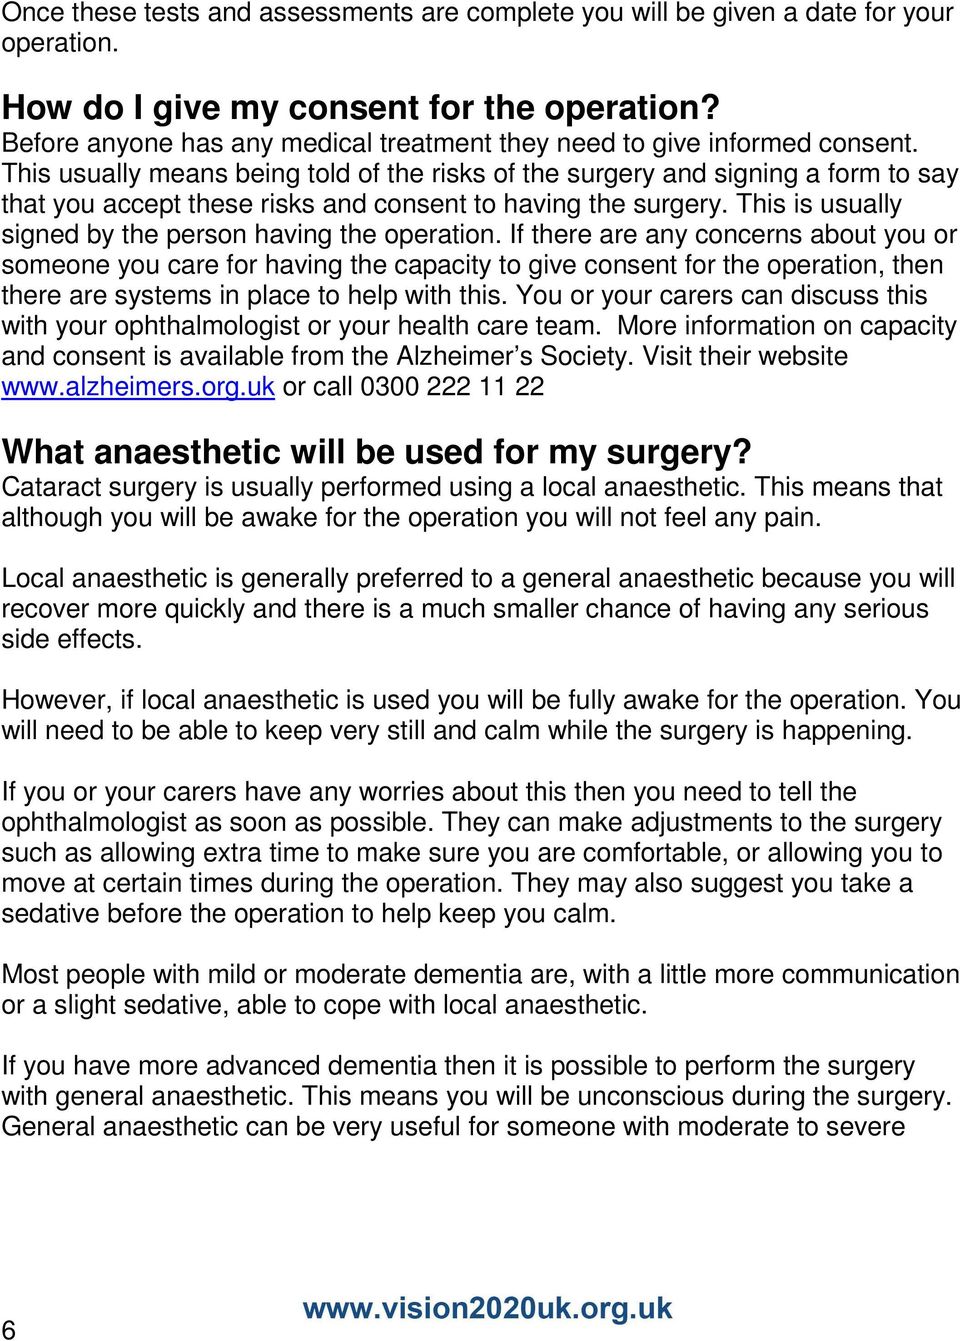 This usually means being told of the risks of the surgery and signing a form to say that you accept these risks and consent to having the surgery.